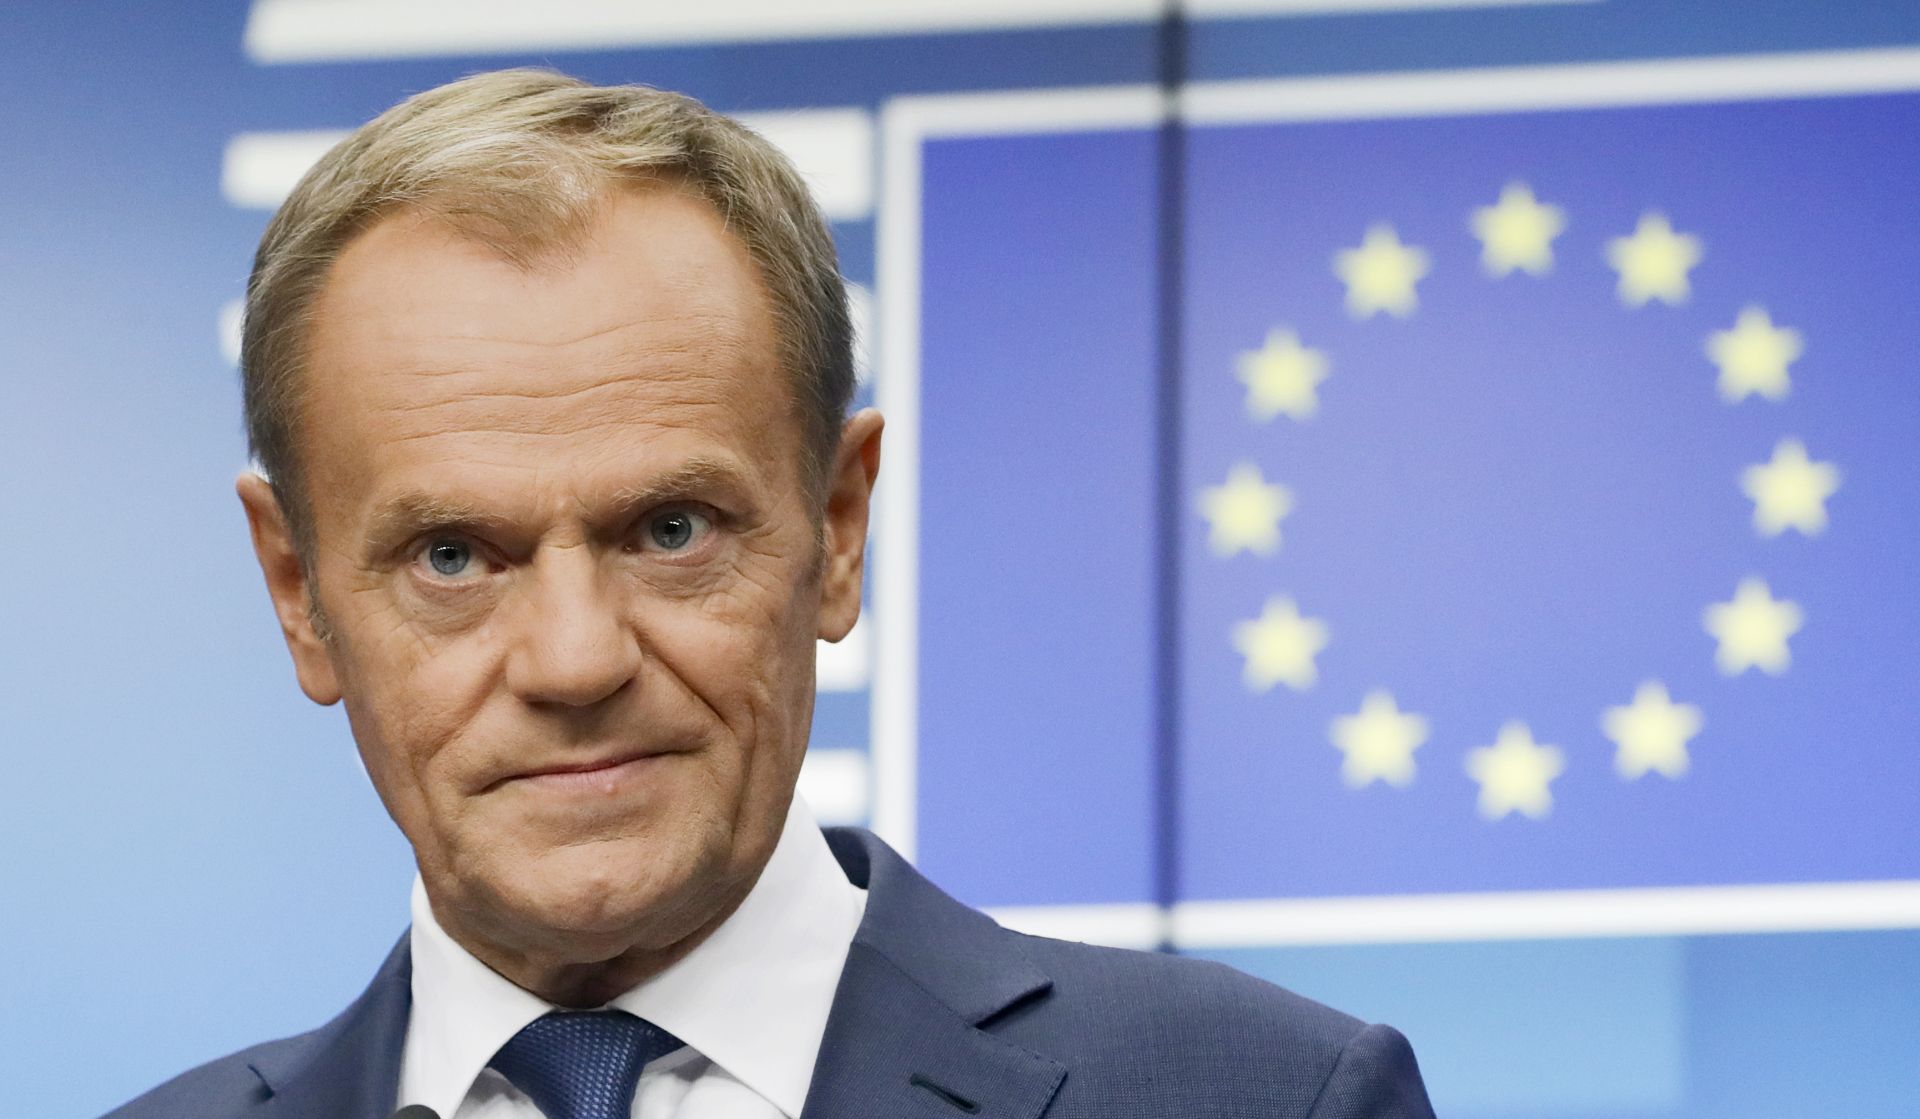 epa07930403 President of the European Council, Donald Tusk gives a press conference at the end of a summit in Brussels, Belgium, 18 October 2019. This news conference is supposed to be the last one in a summit of both Presidents during their mandate.  EPA/OLIVIER HOSLET